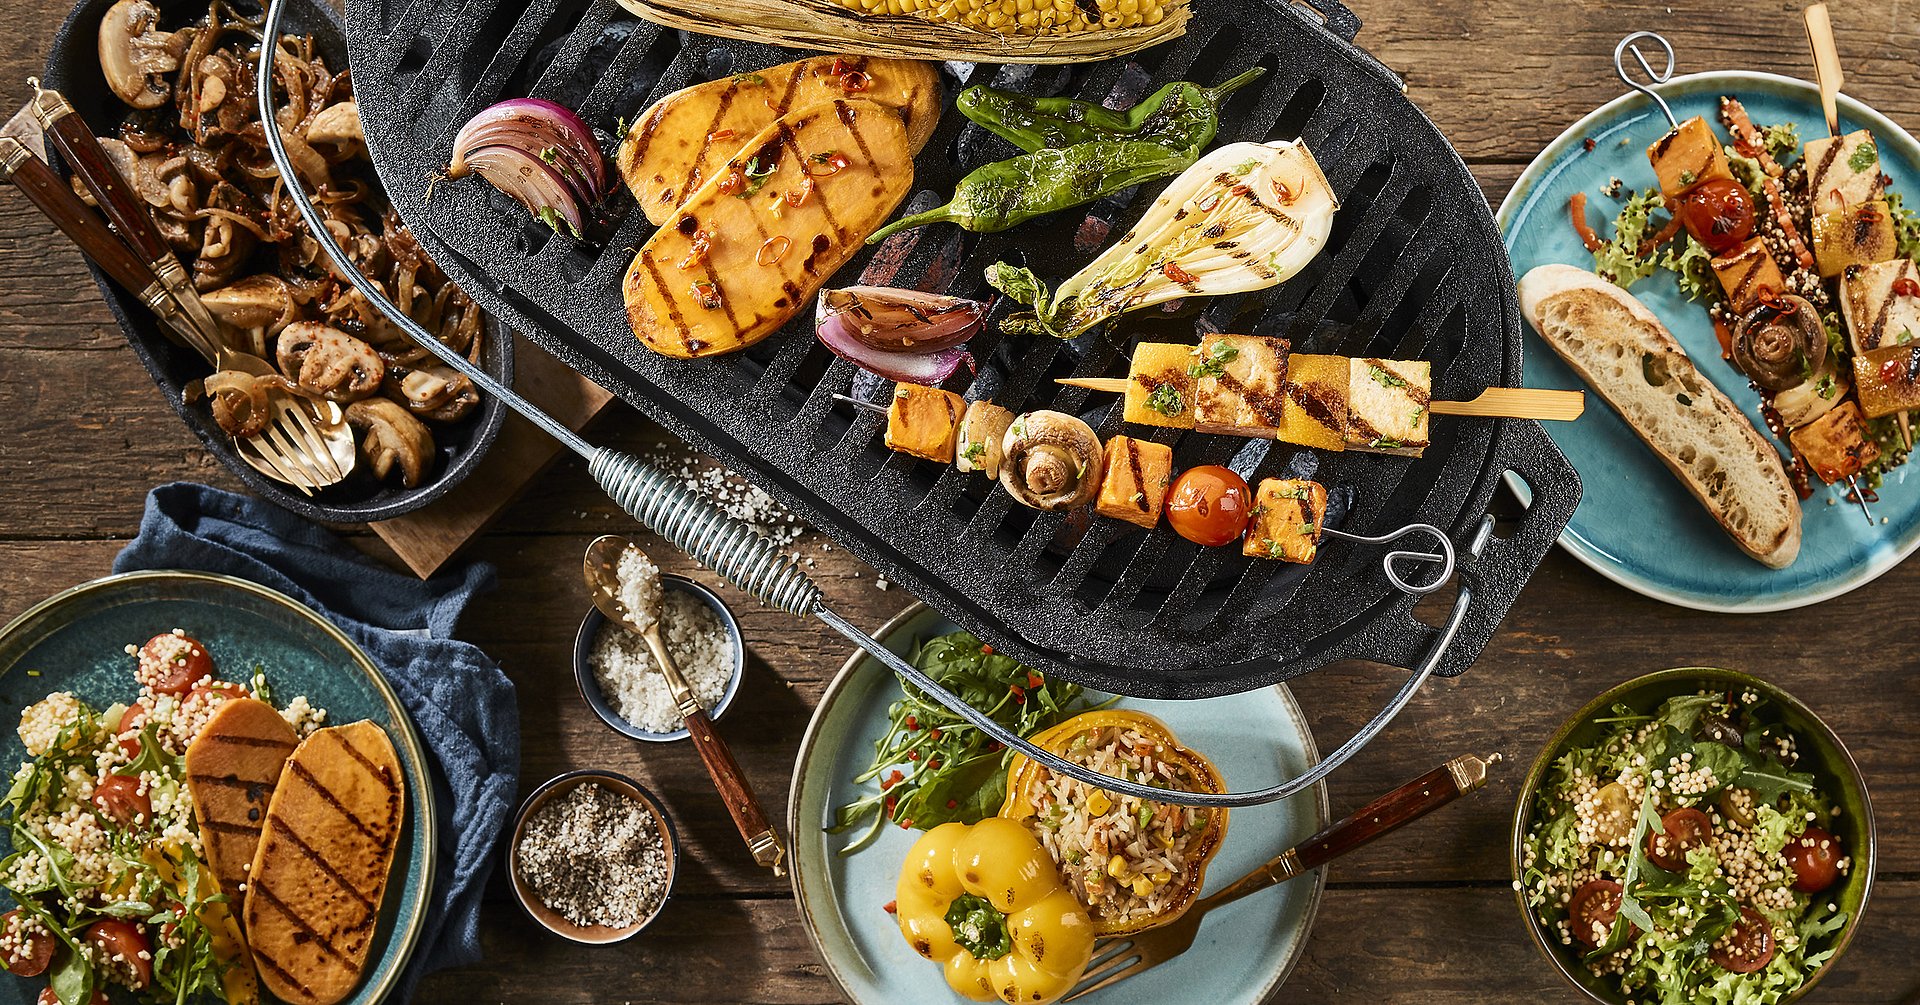 Vegetarian barbecue grilled dishes on timber table